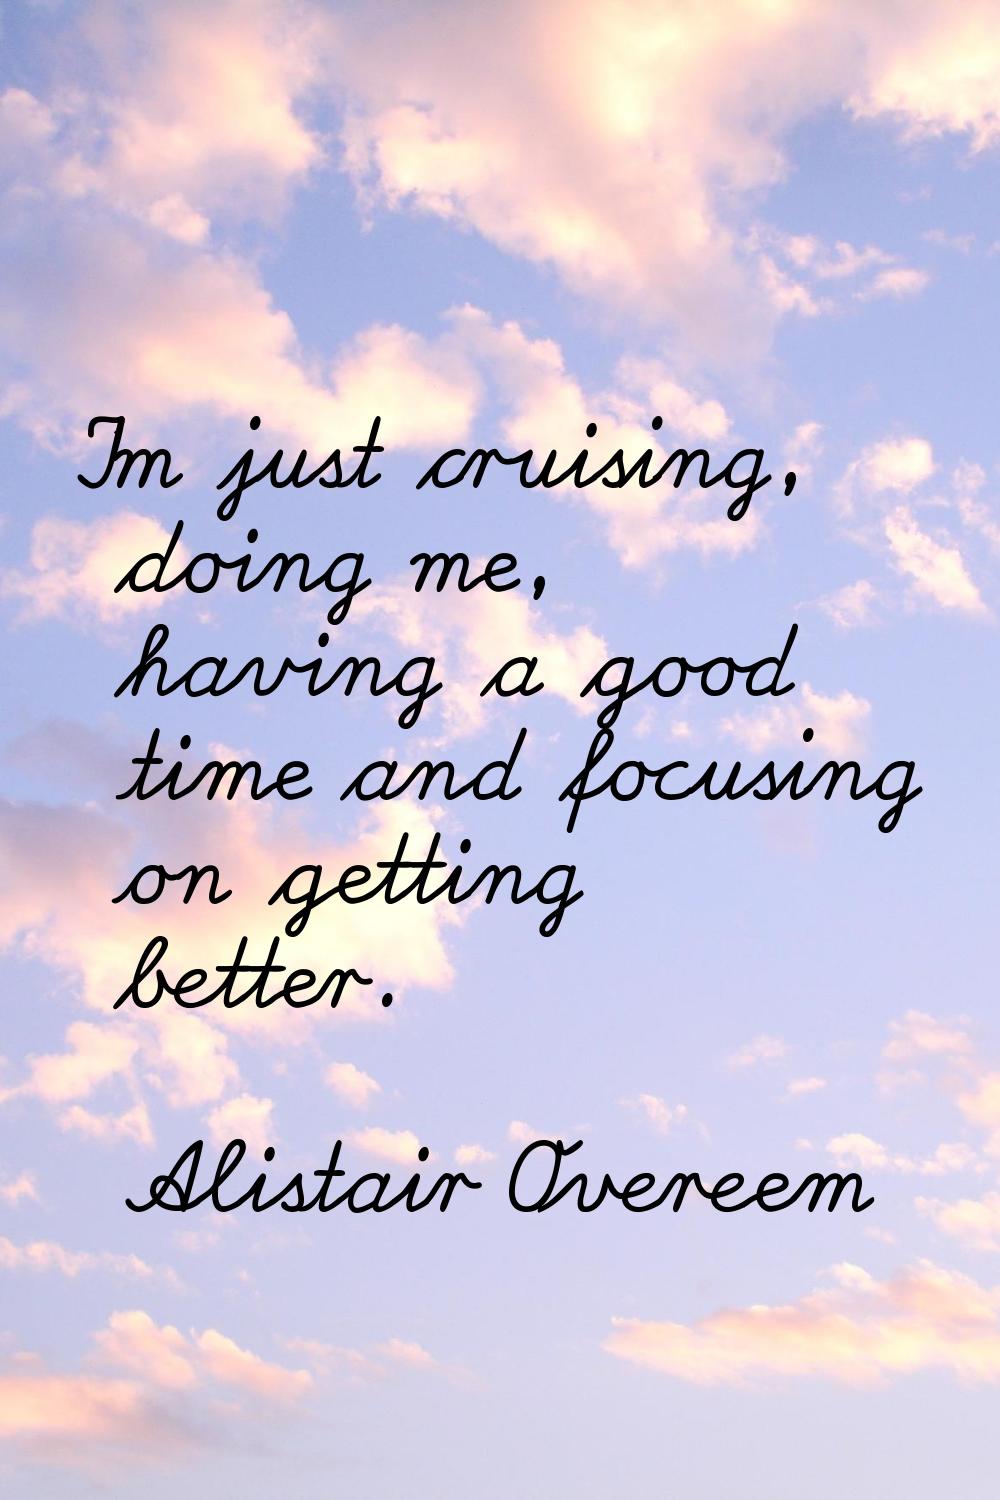 I'm just cruising, doing me, having a good time and focusing on getting better.